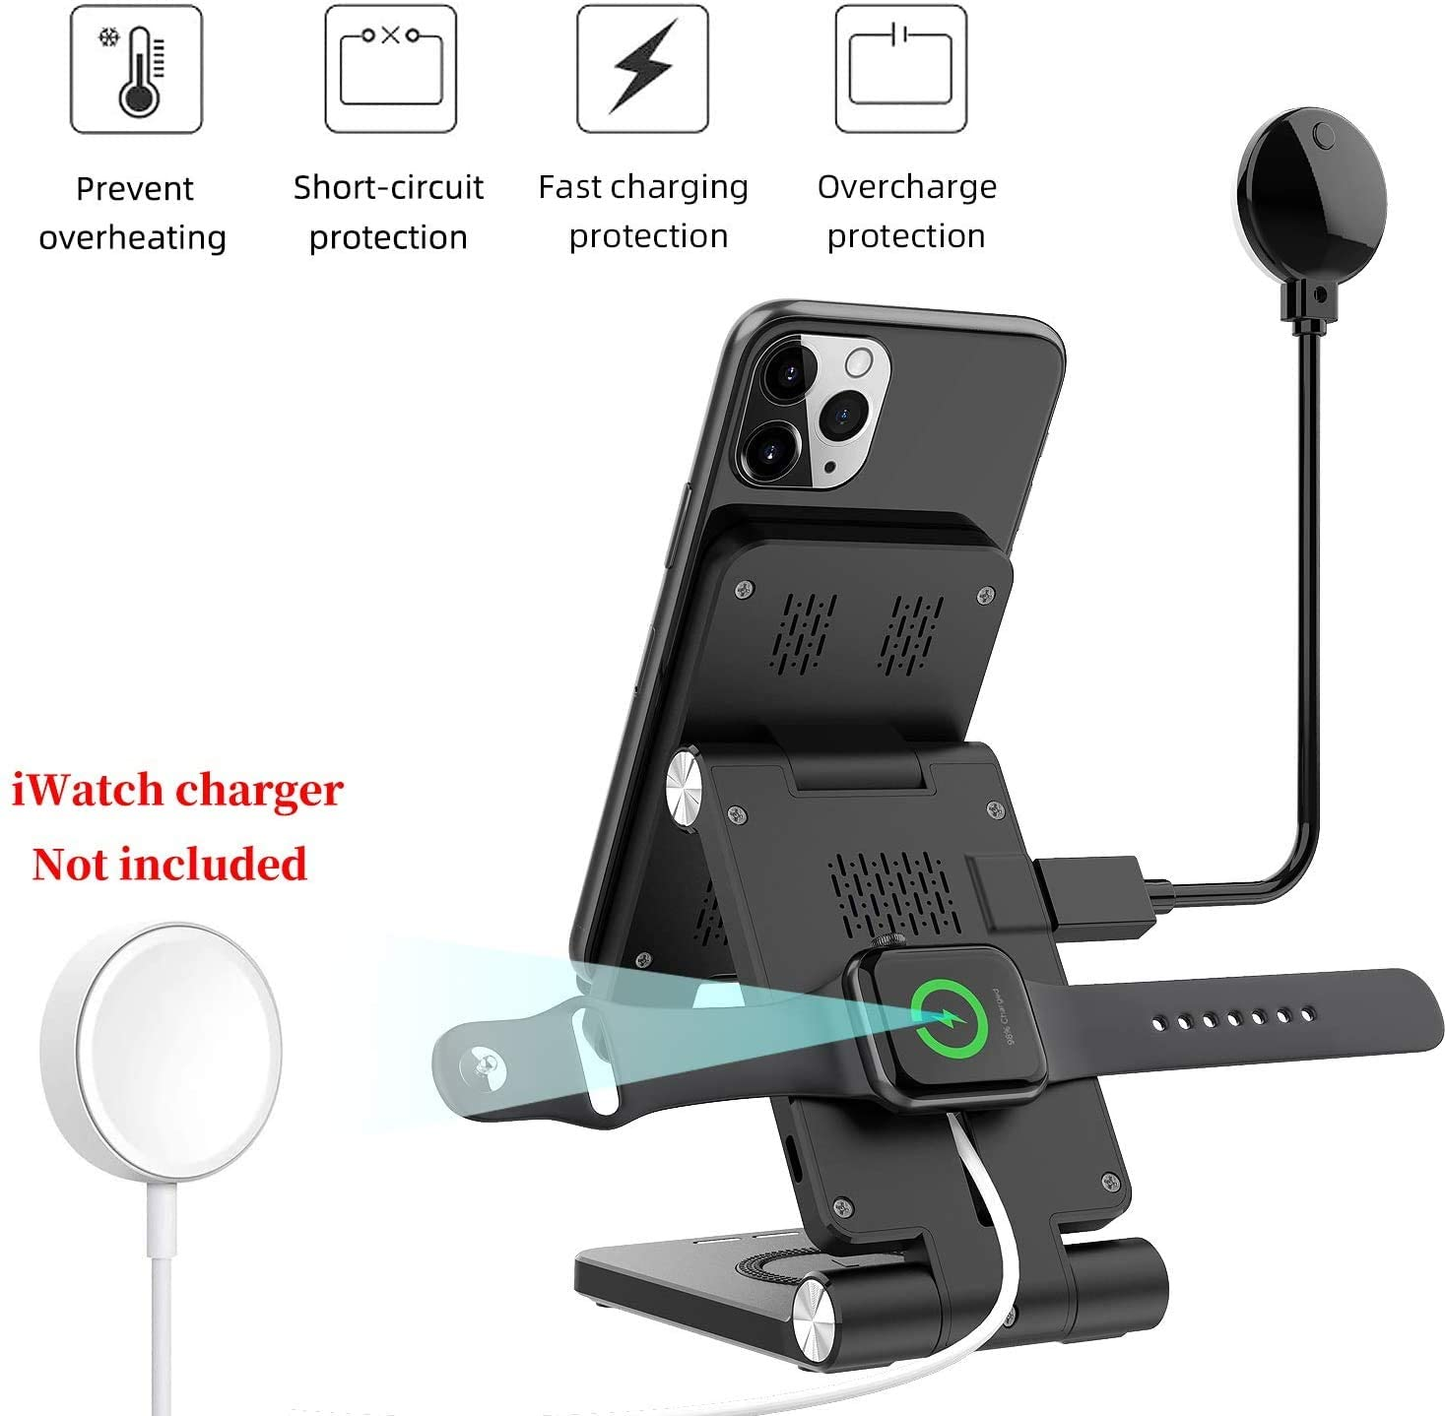 Wireless Charger, FEIKU 4 in 1 Portable Foldable Fast Wireless Charging Station LED Desk Lamp for Apple Iphone 11/Iphone 13/13Pro/13Pro Max/13 Mini/Watch/Airpods Pro（With QC3.0 Adapter）